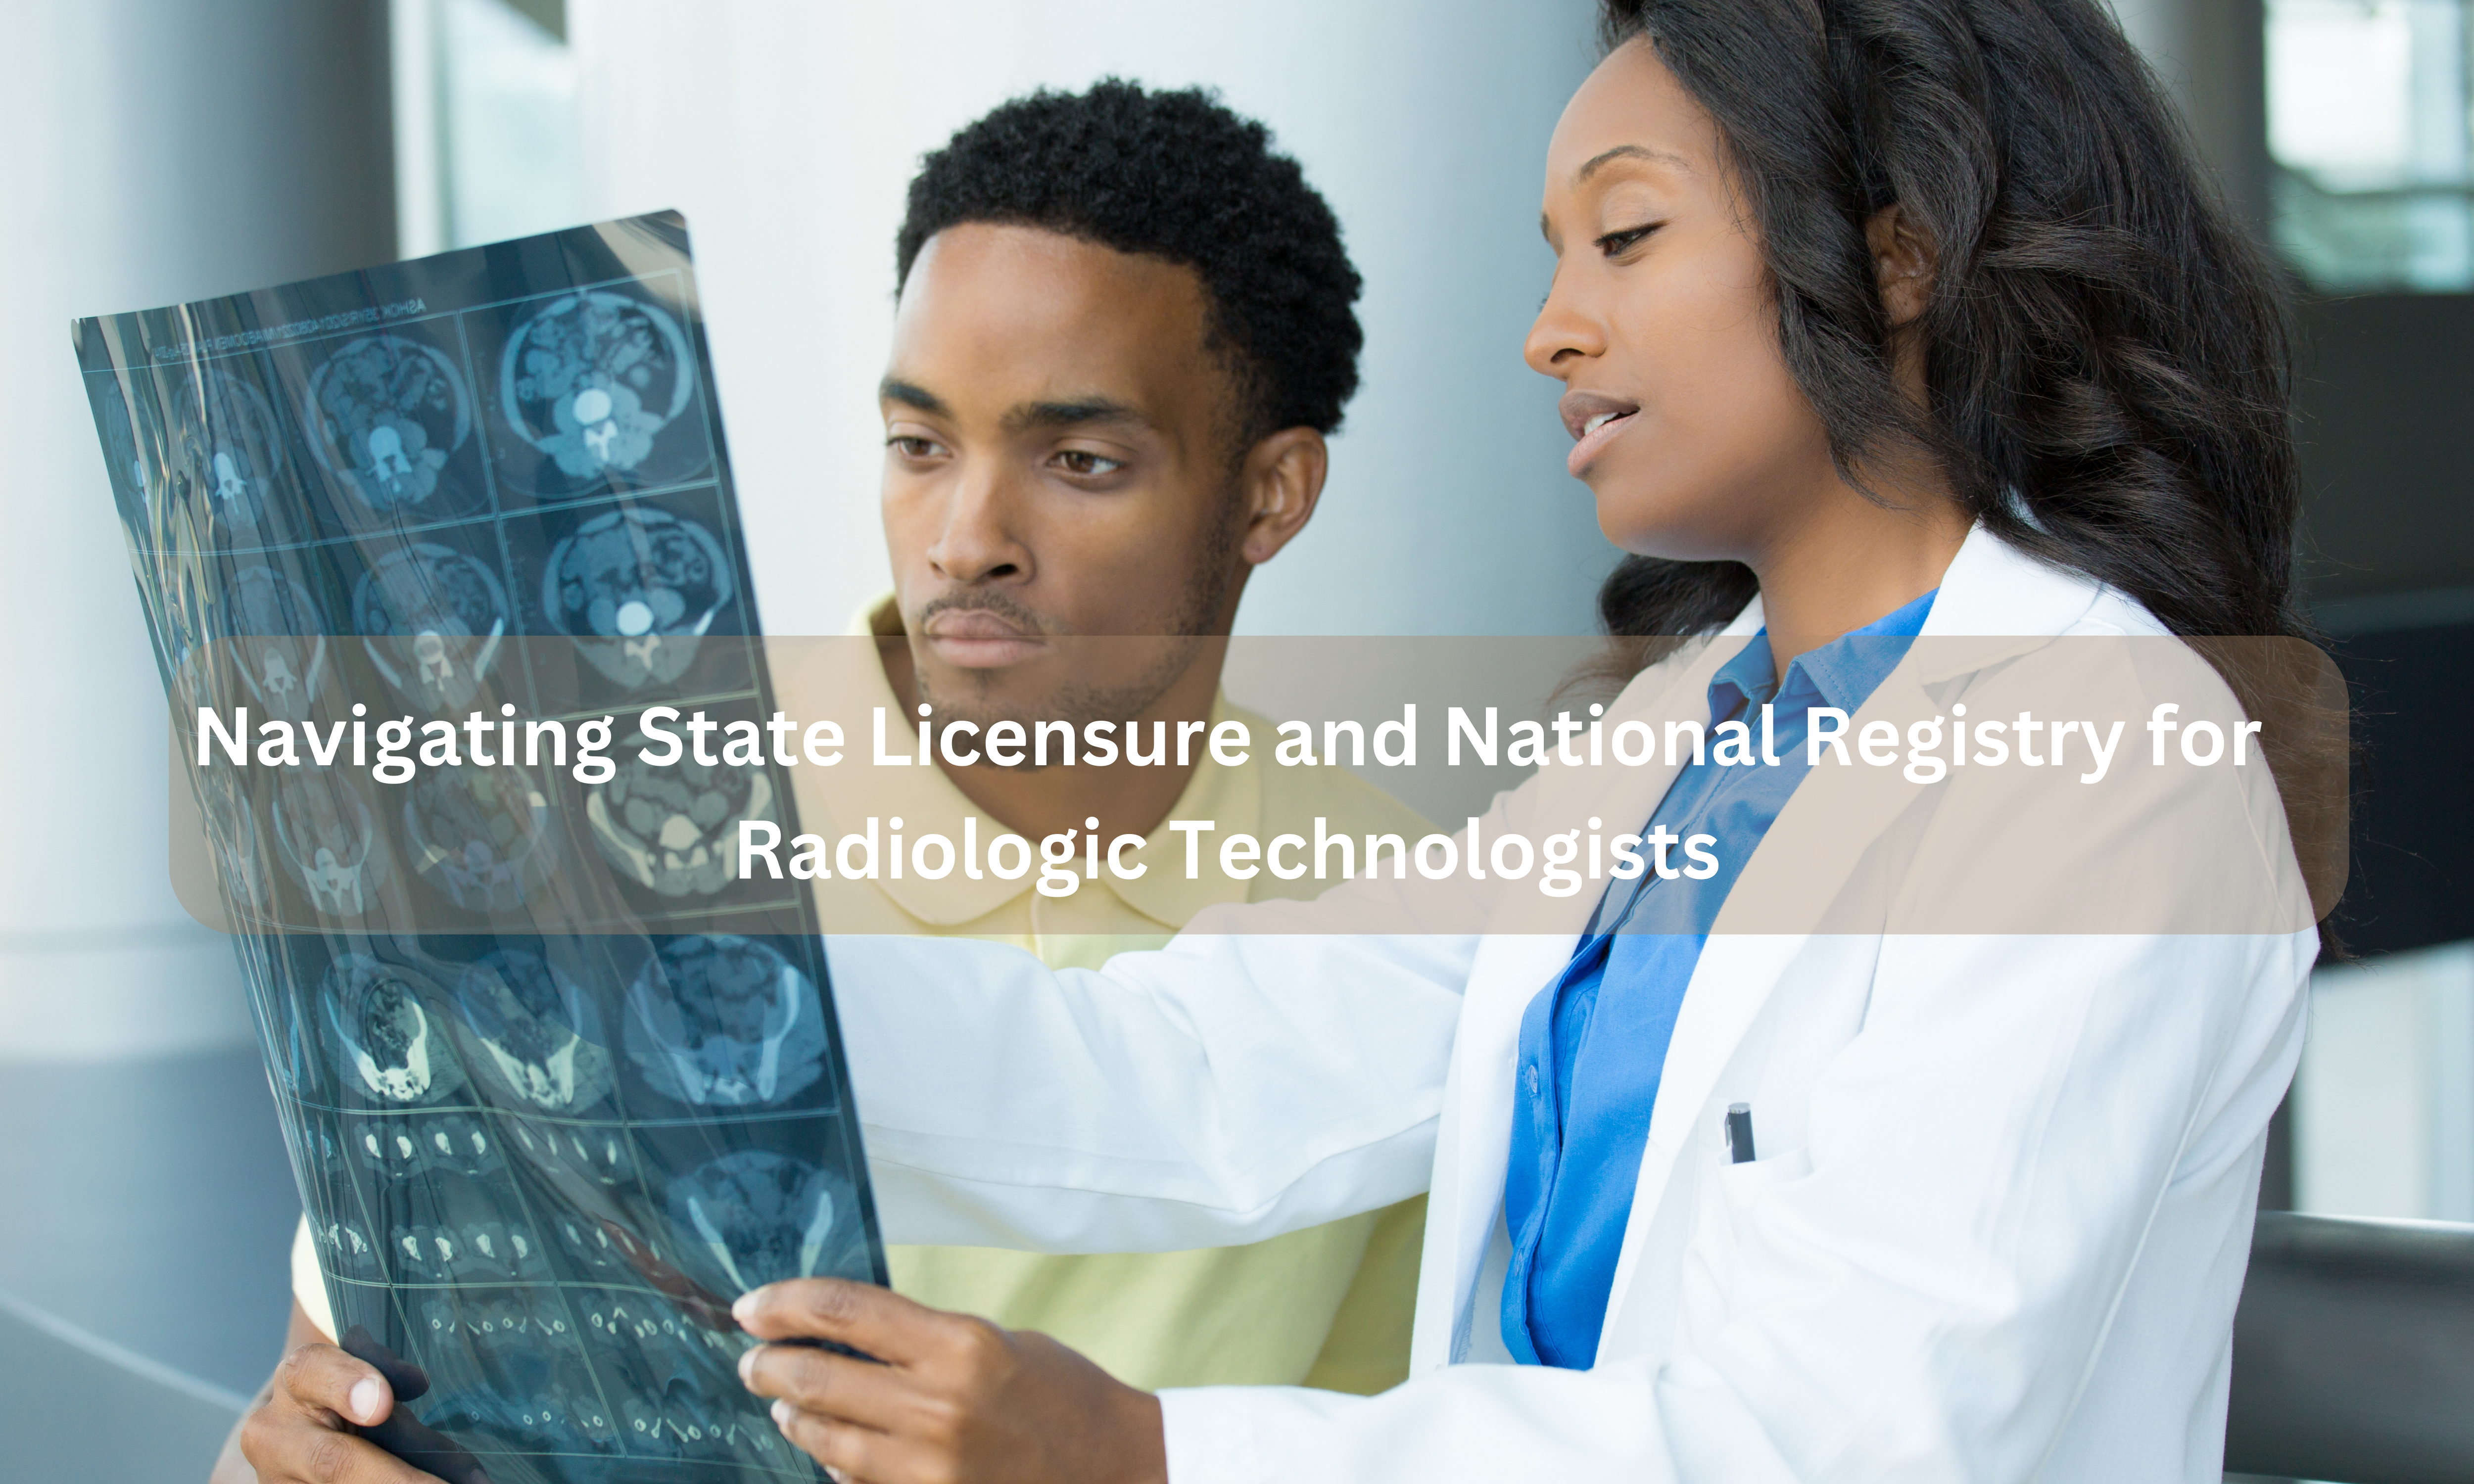 Navigating State Licensure and National Registry for Radiologic Technologists